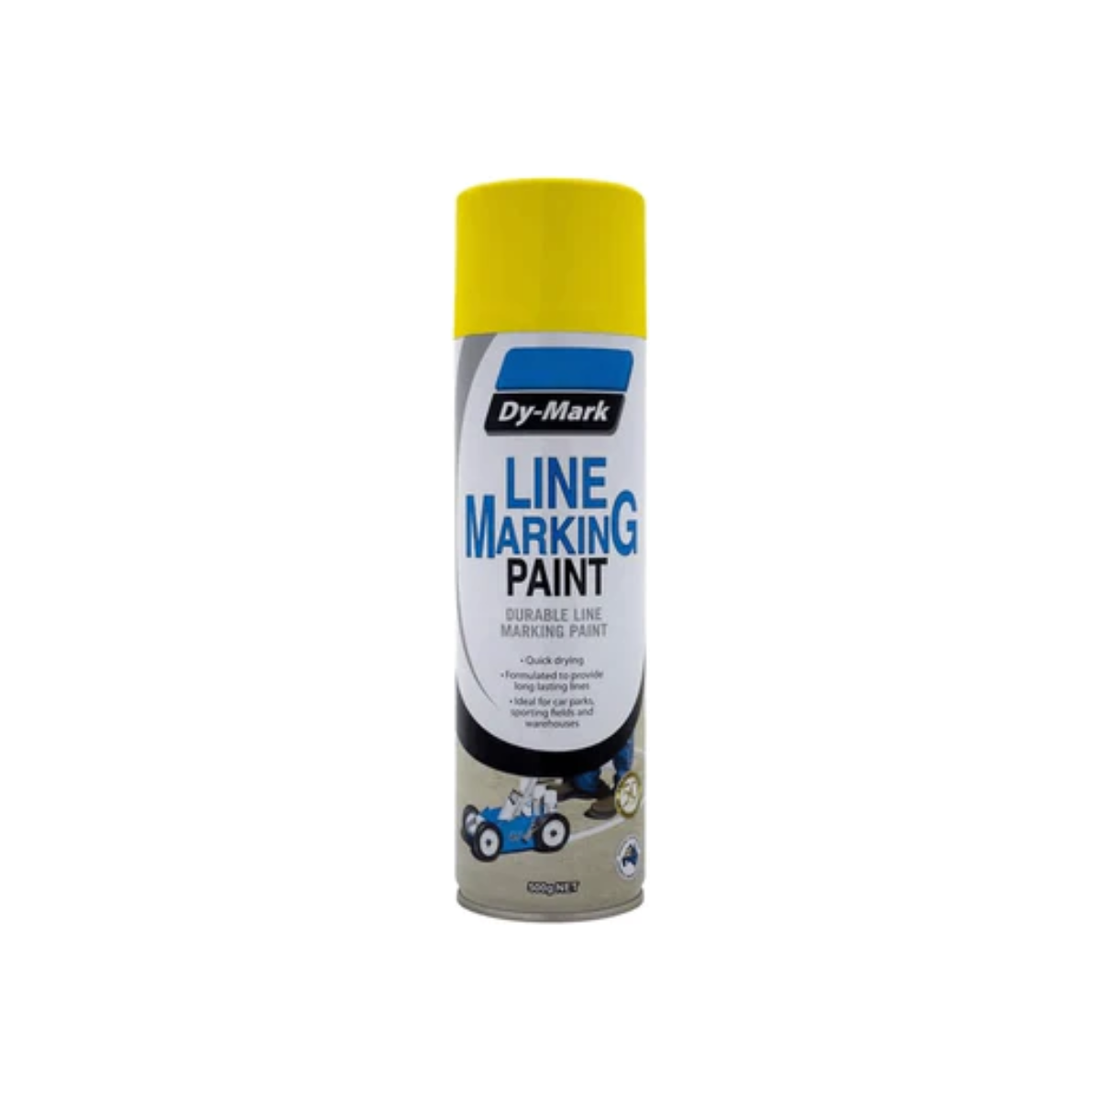 line-marking-paint-group